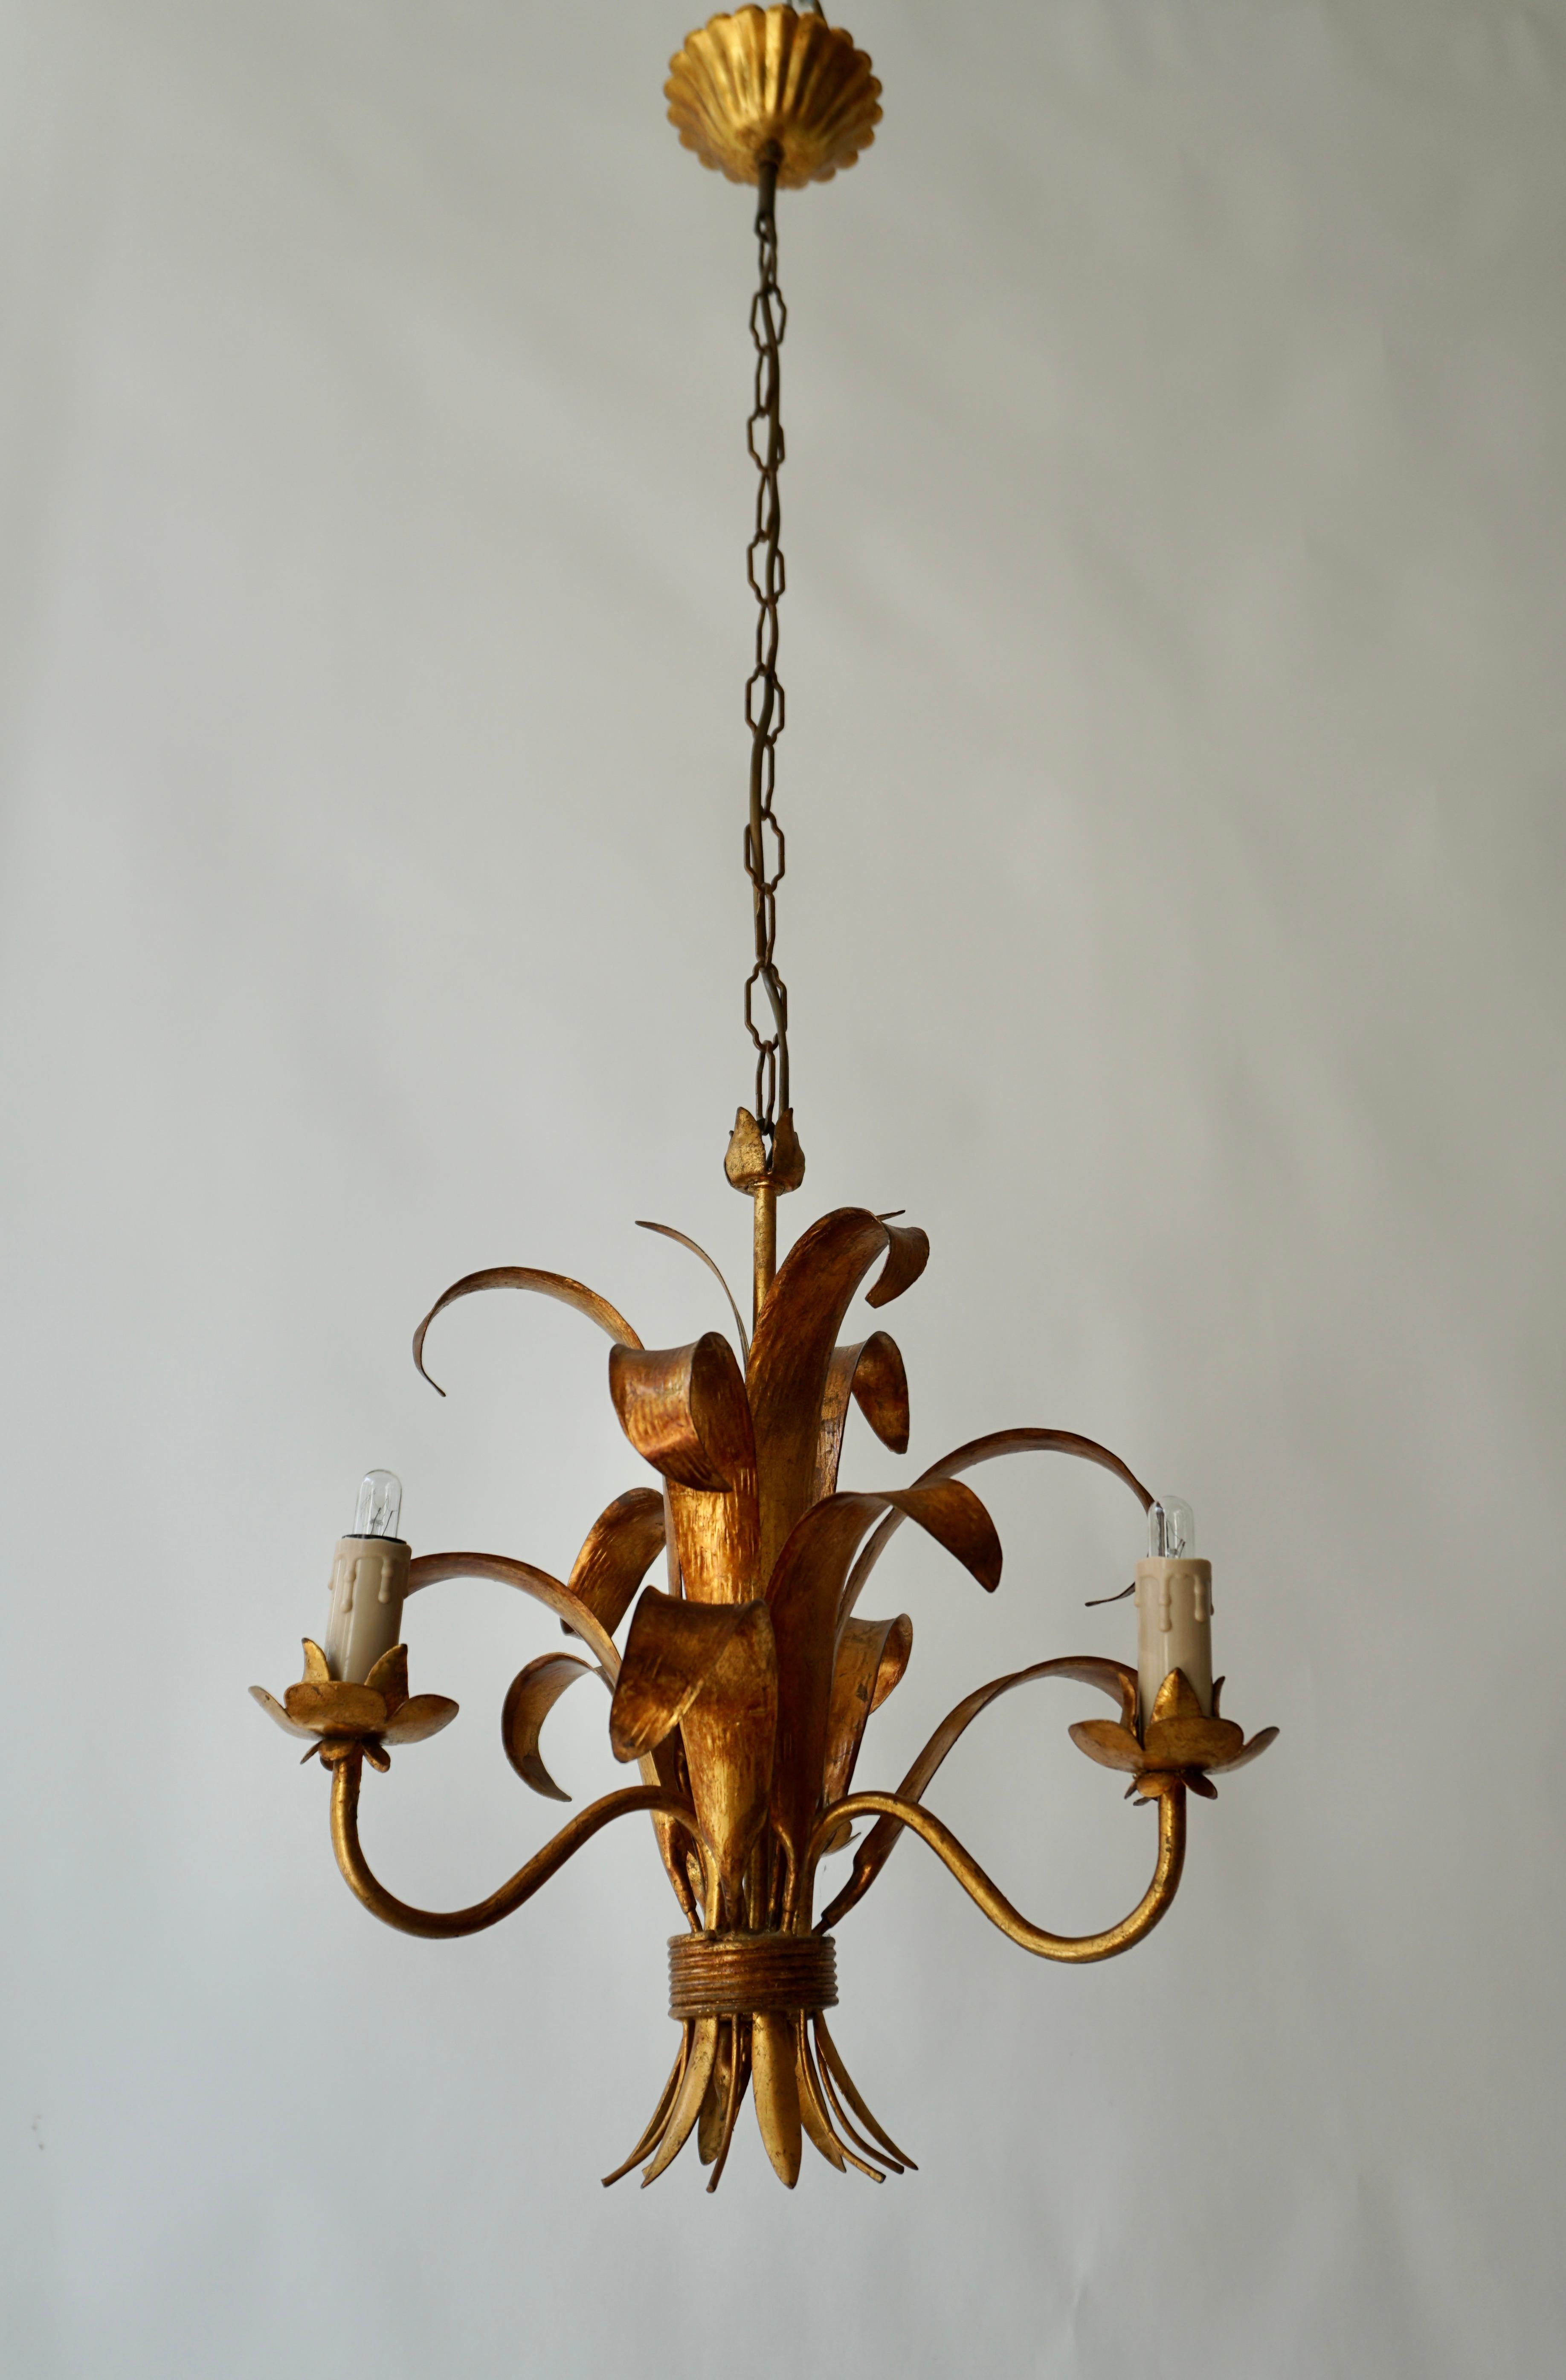 Gilt metal, Hollywood Regency chandelier.

Total height including the chain is 40